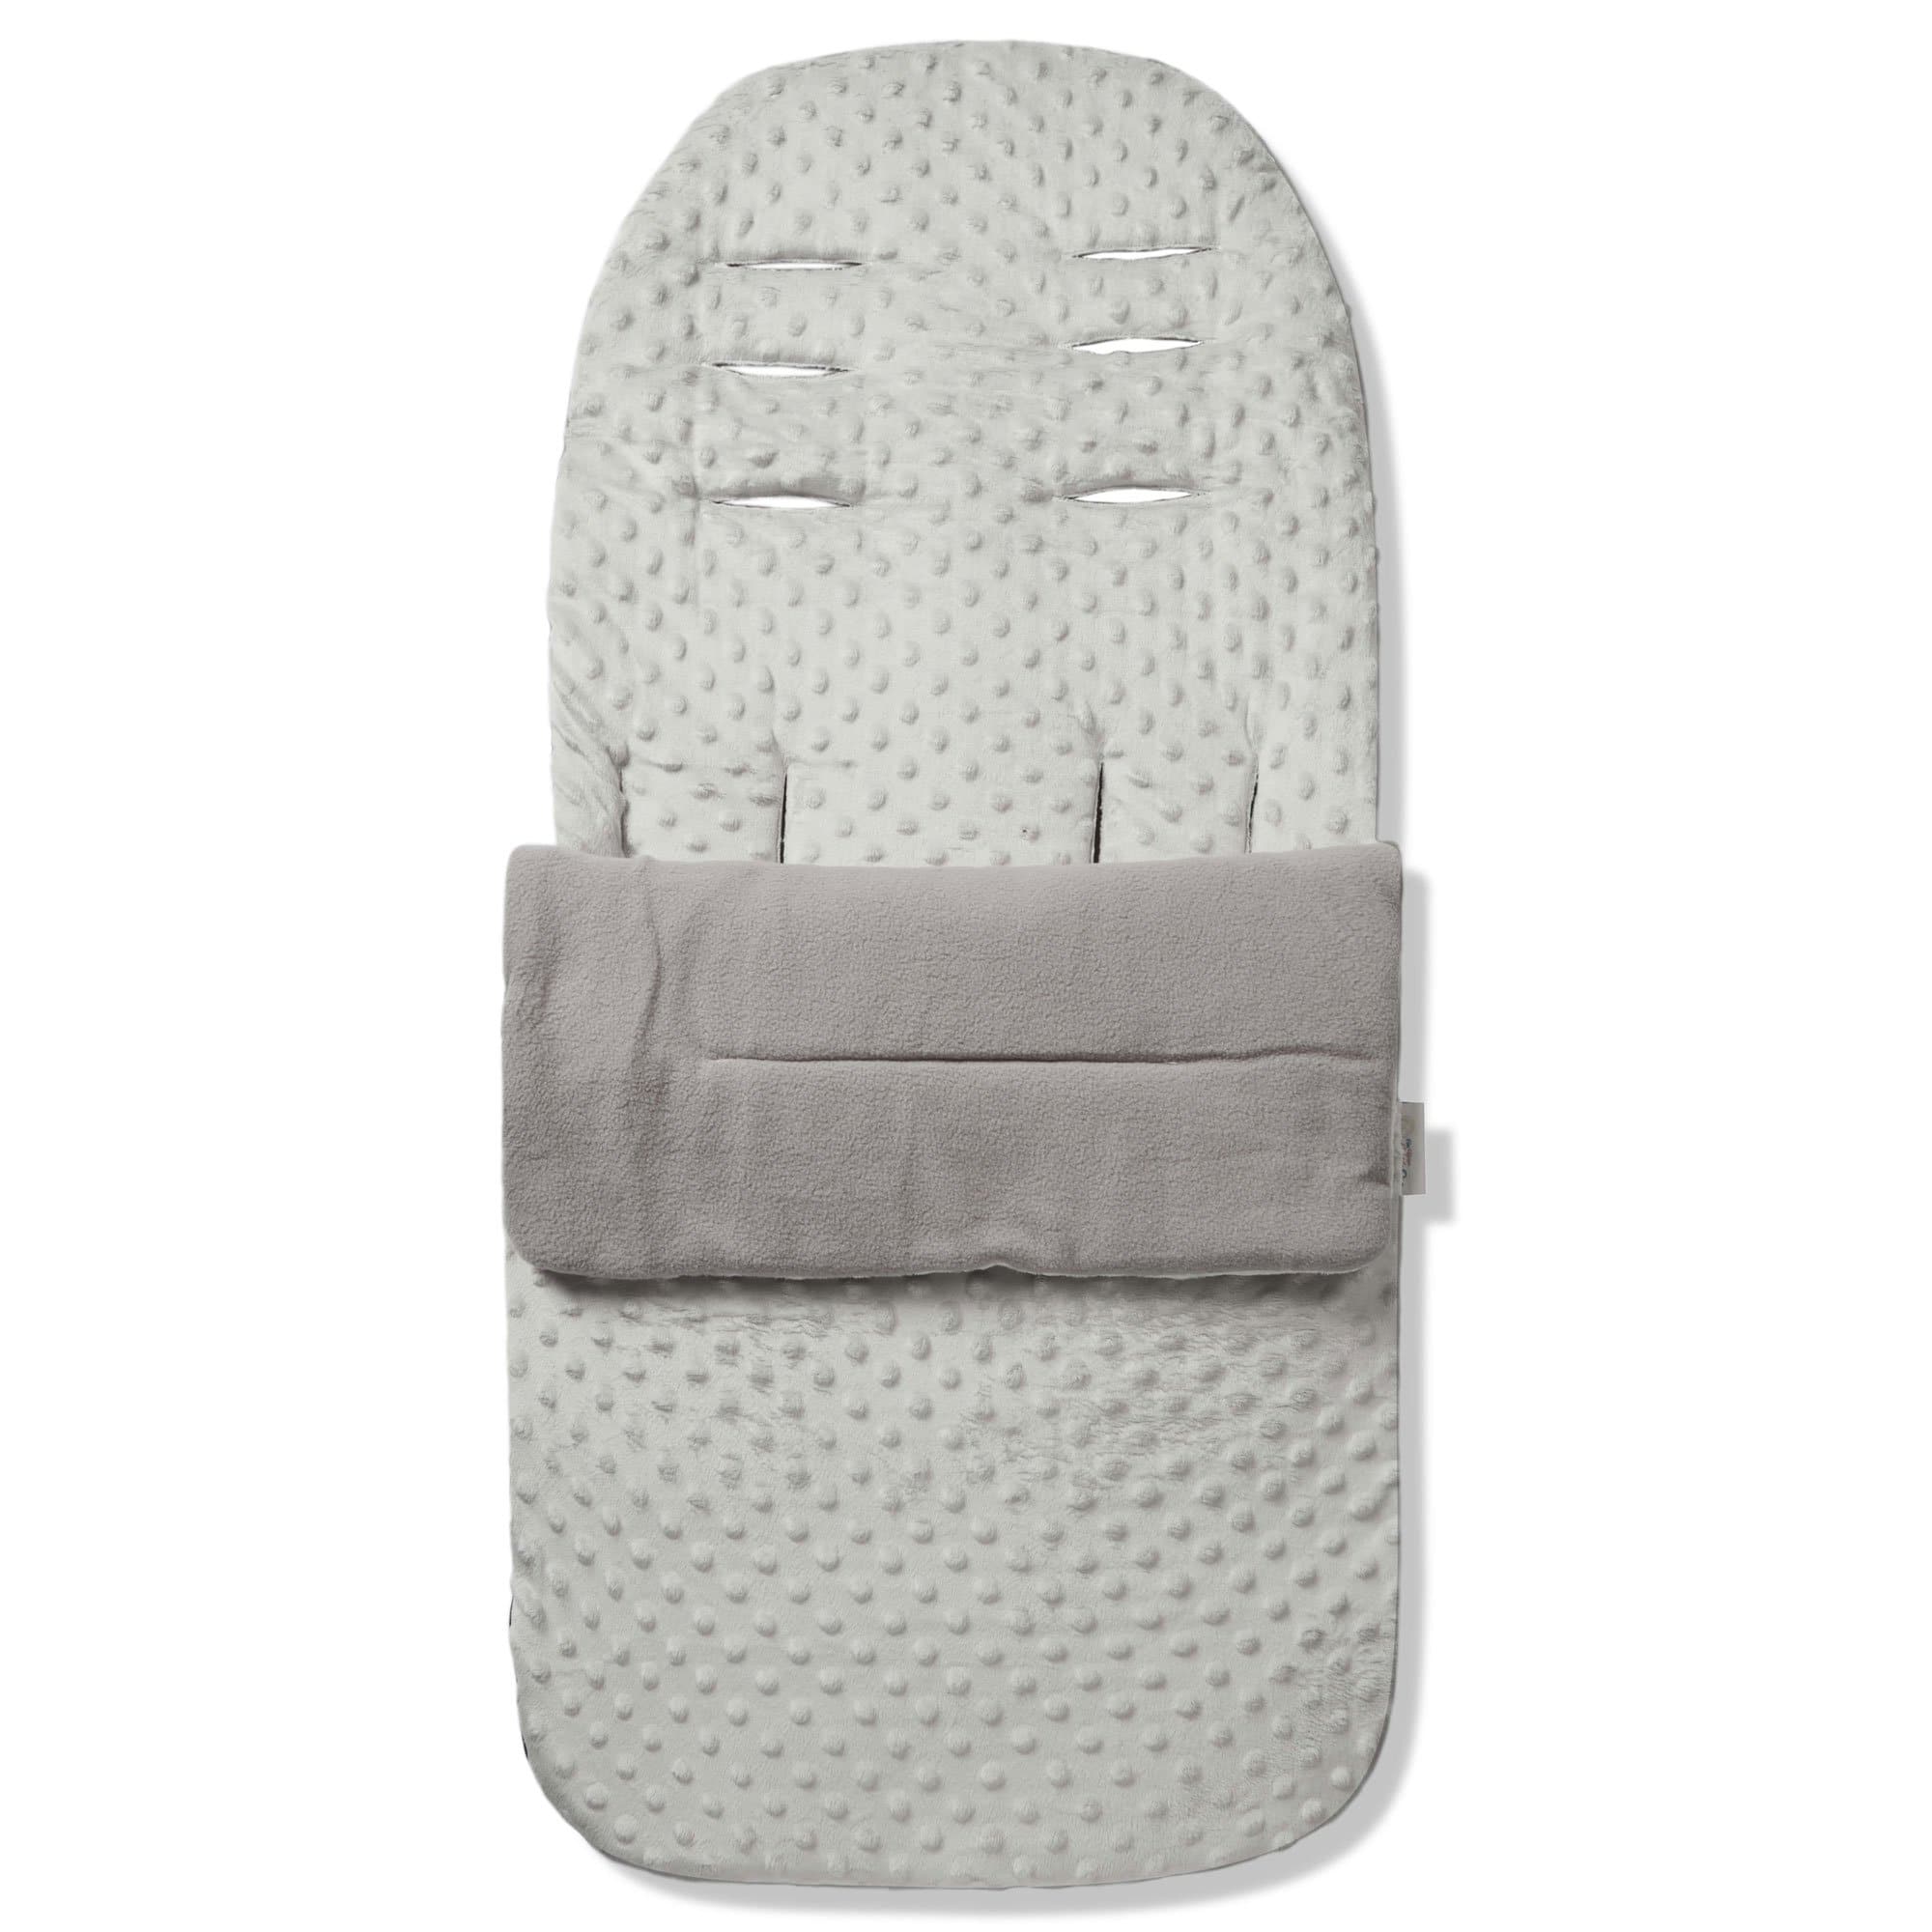 Dimple Footmuff / Cosy Toes Compatible with Tippitoes - Grey / Fits All Models | For Your Little One